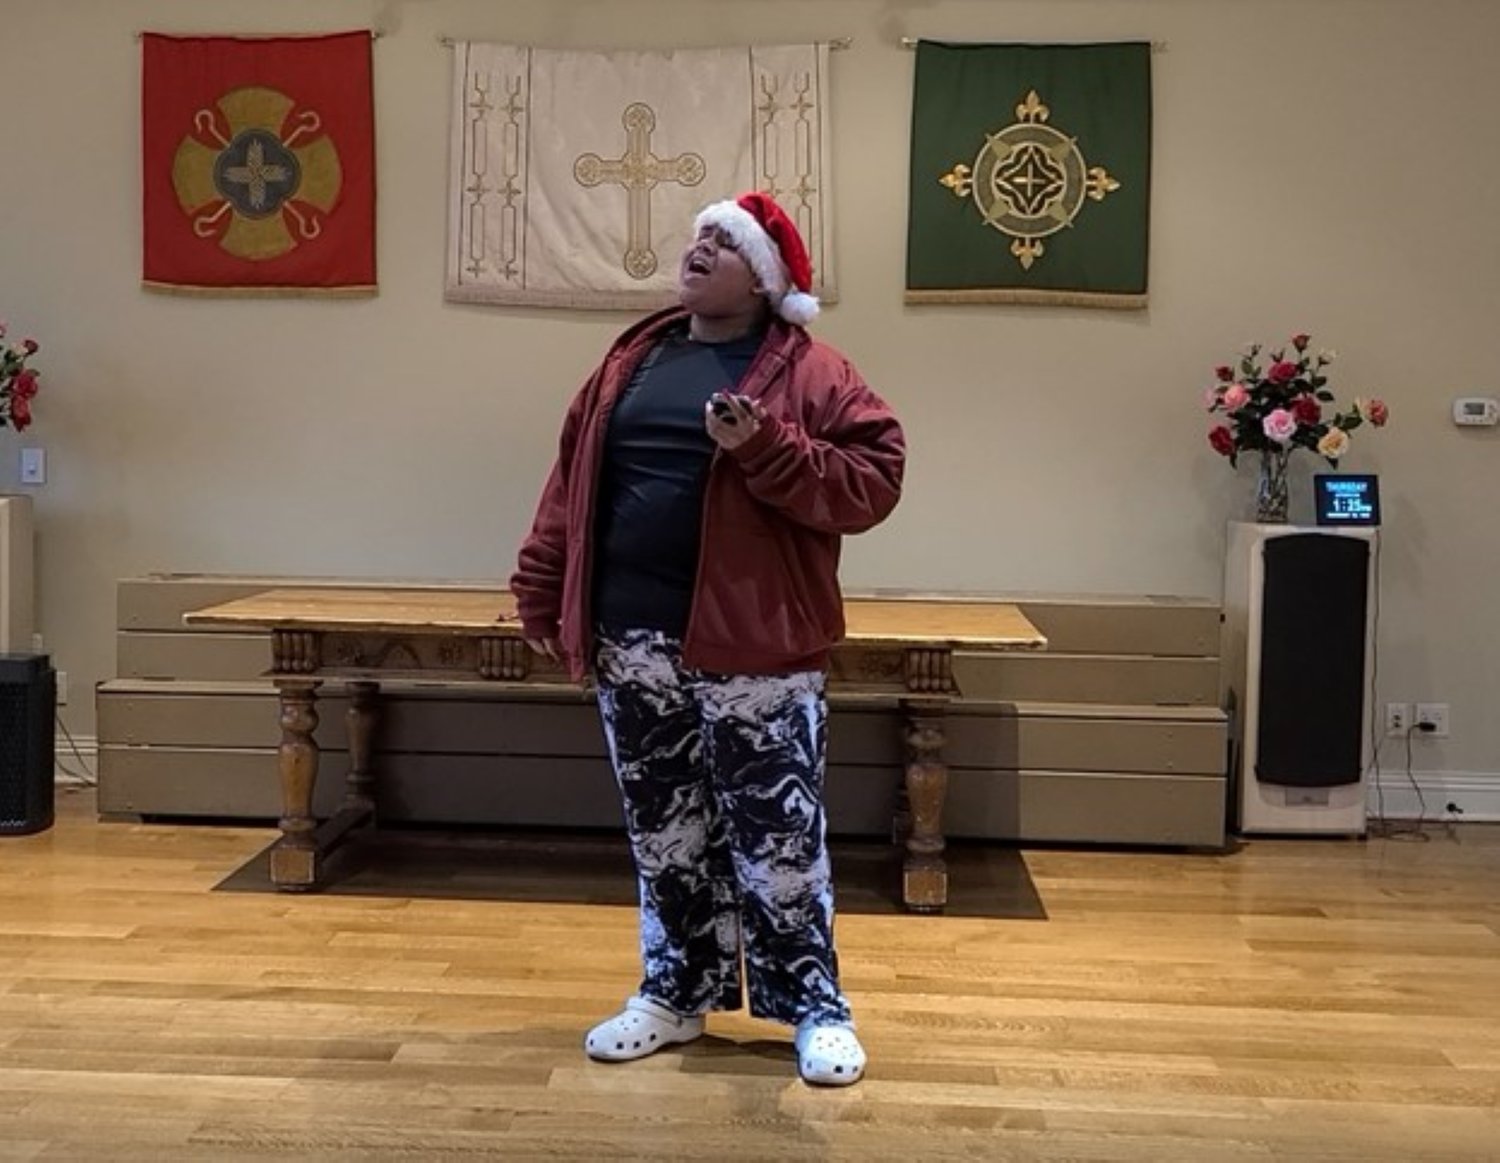 Luke Islam, a junior at St. Dominic’s High School, performed at the Life Enrichment Center in Oyster Bay in December, spreading holiday joy among the seniors in attendance.